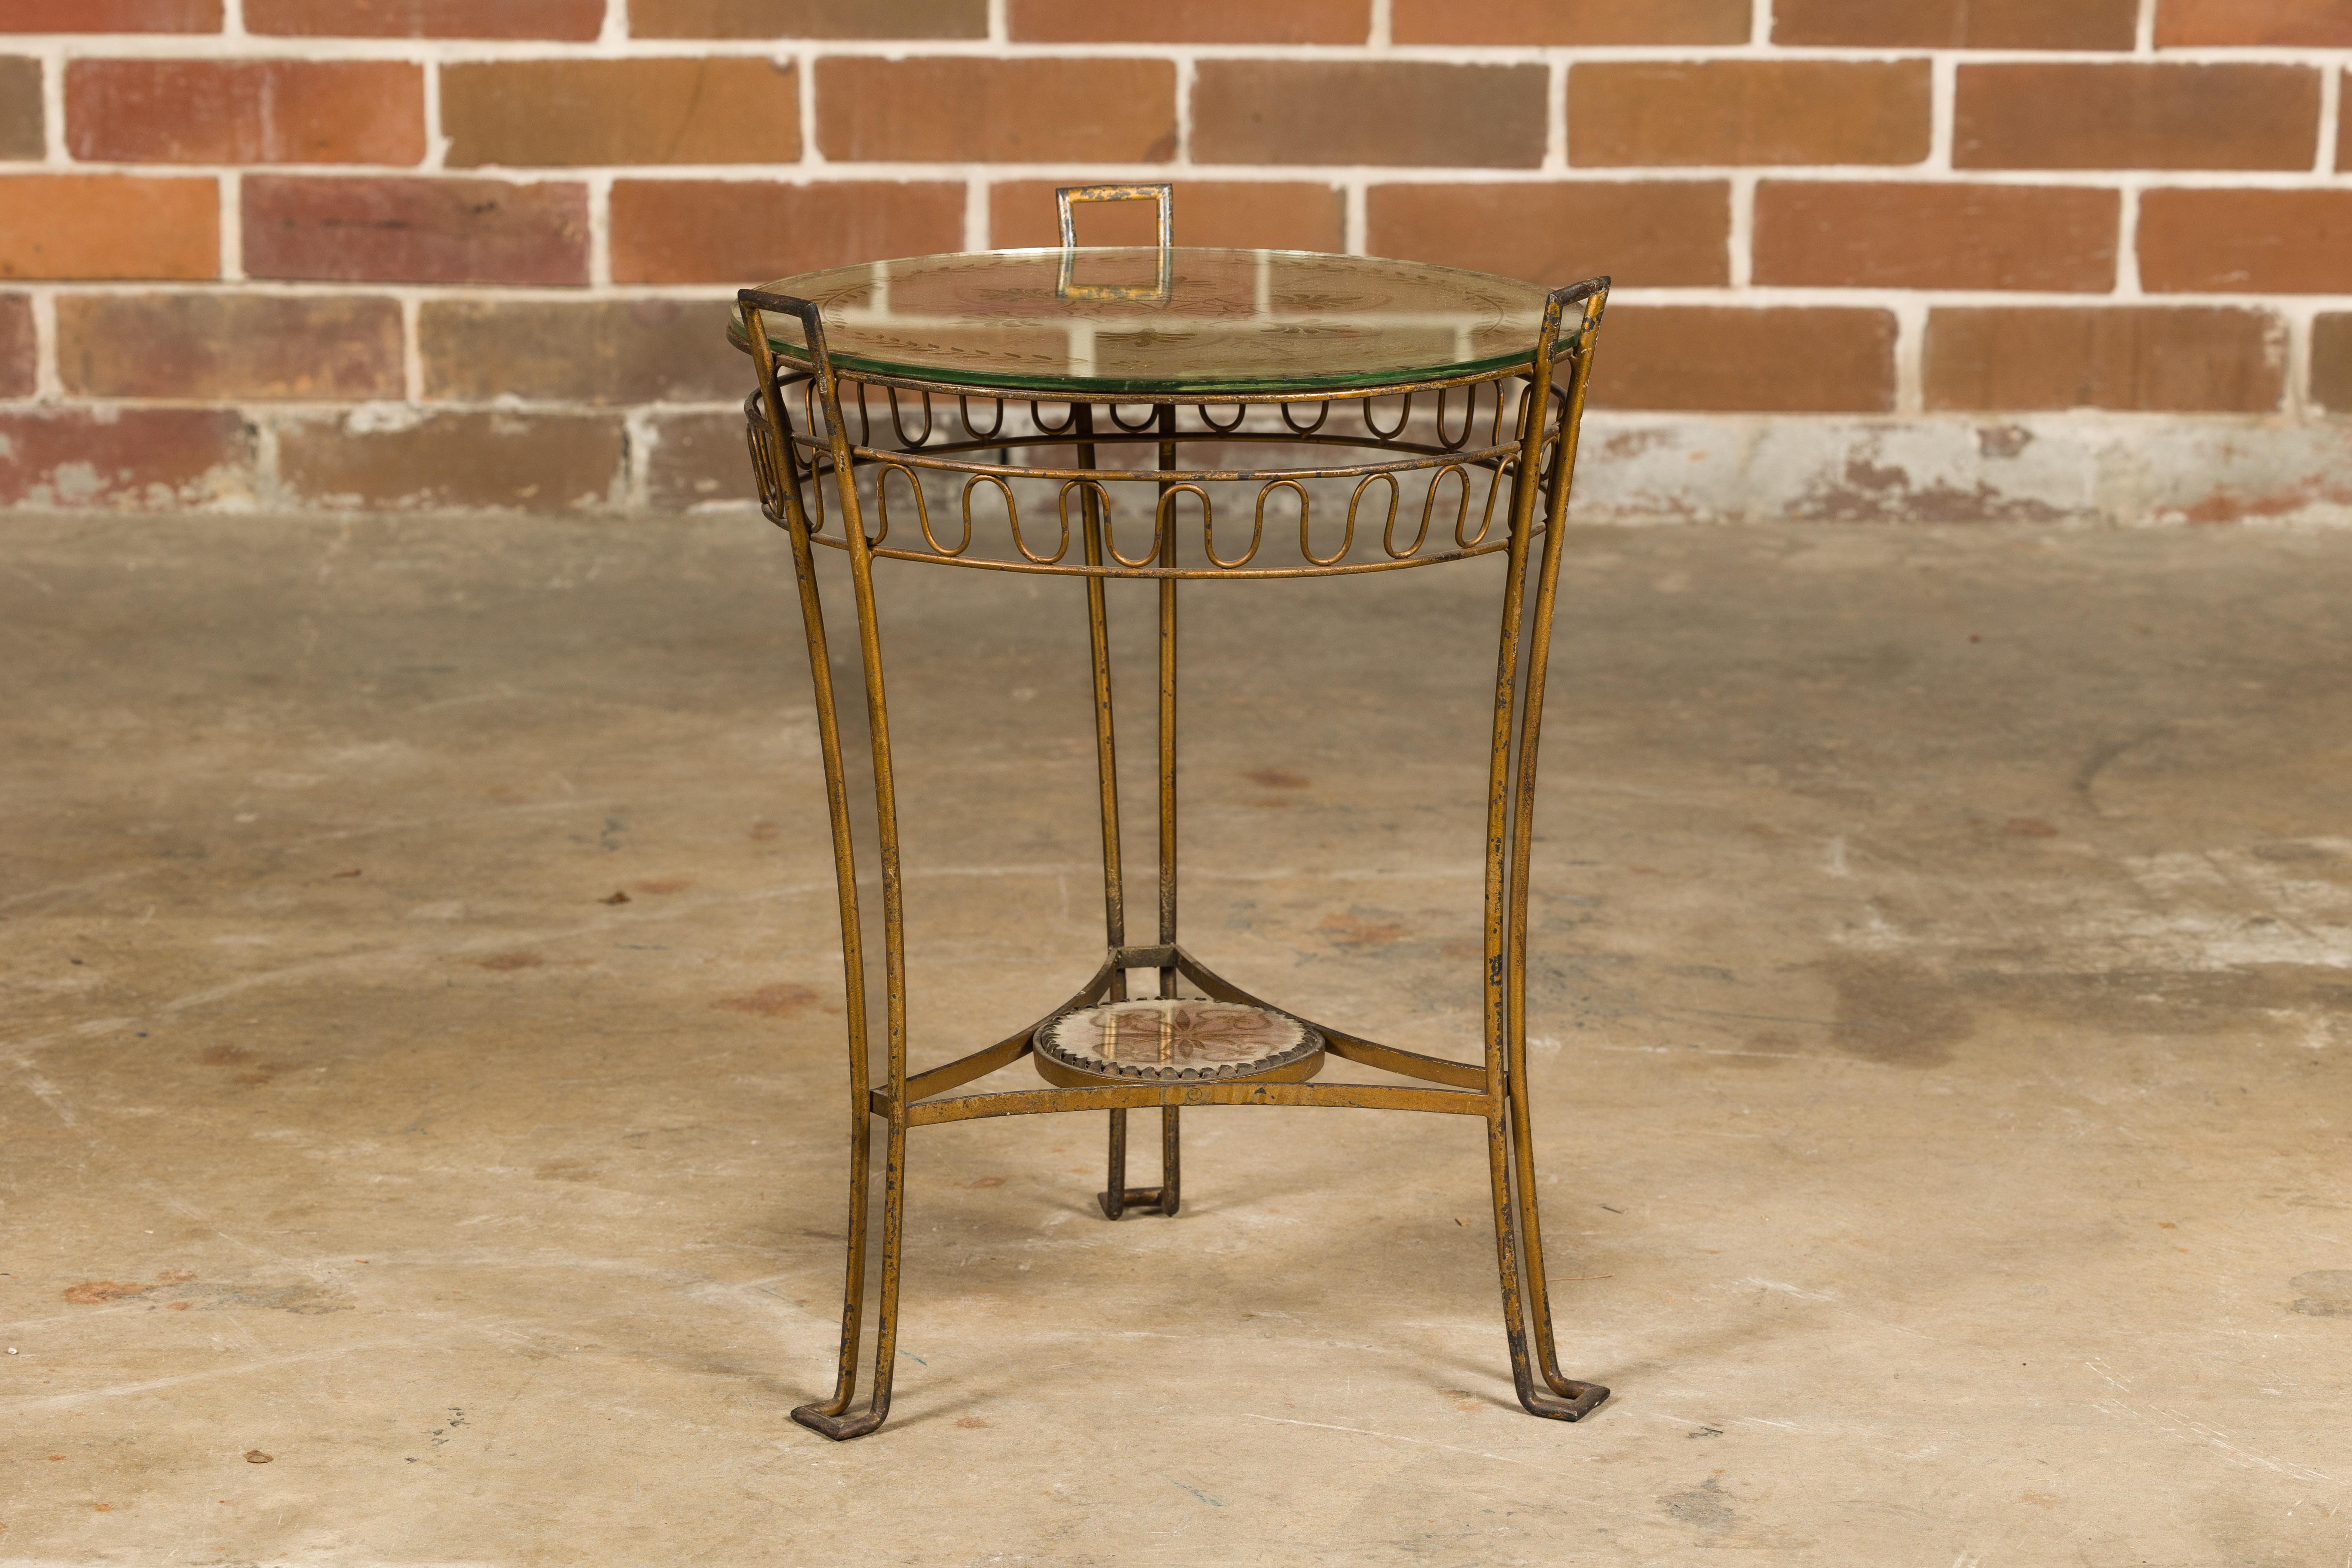 French 1920s Gilt Iron Side Table with Etched Foliage Mirrored Top and Low Shelf For Sale 1